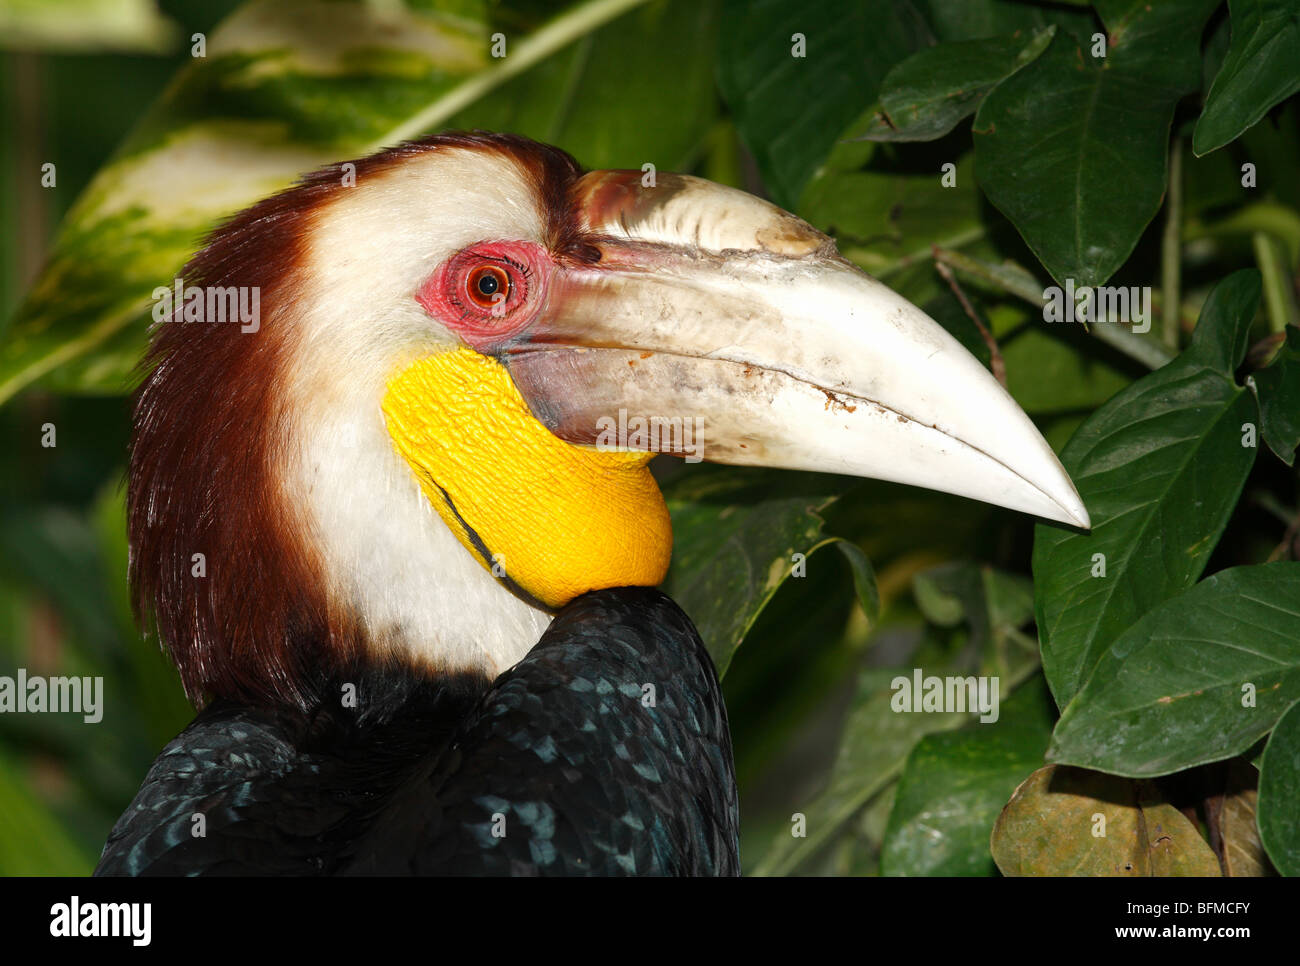 Male Wreathed Hornbill, also known as the bar-pouched wreathed hornbill, Rhyticeros undulatus Stock Photo